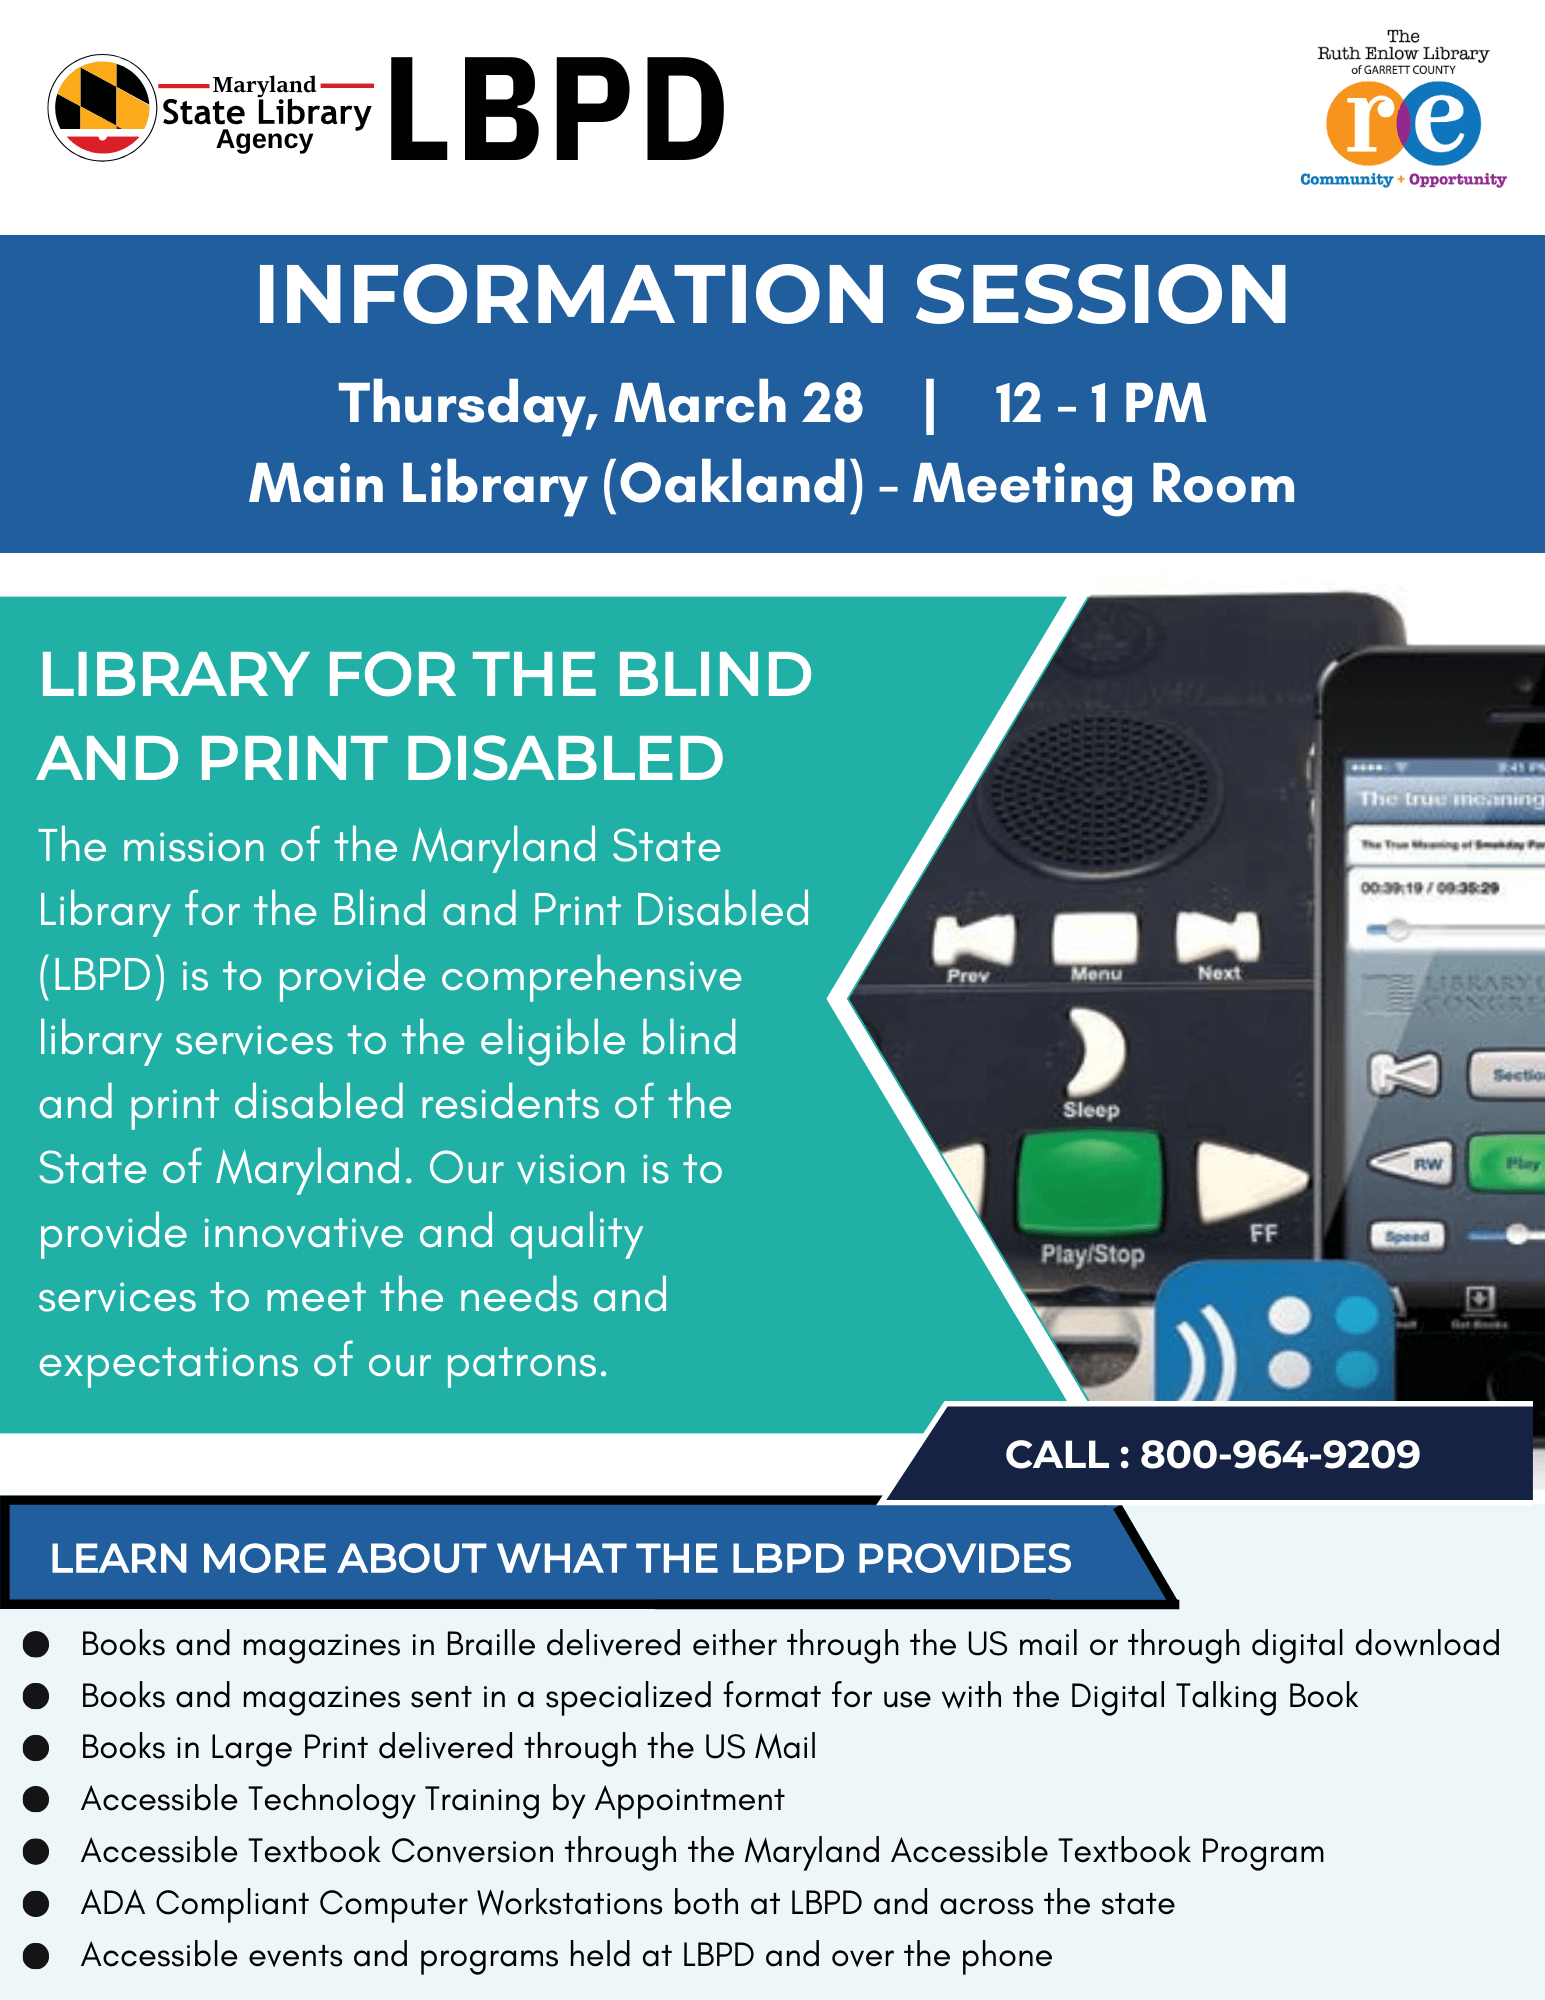 Library for the Blind and Print Disabled Information Session at Deep Creek Lake, MD